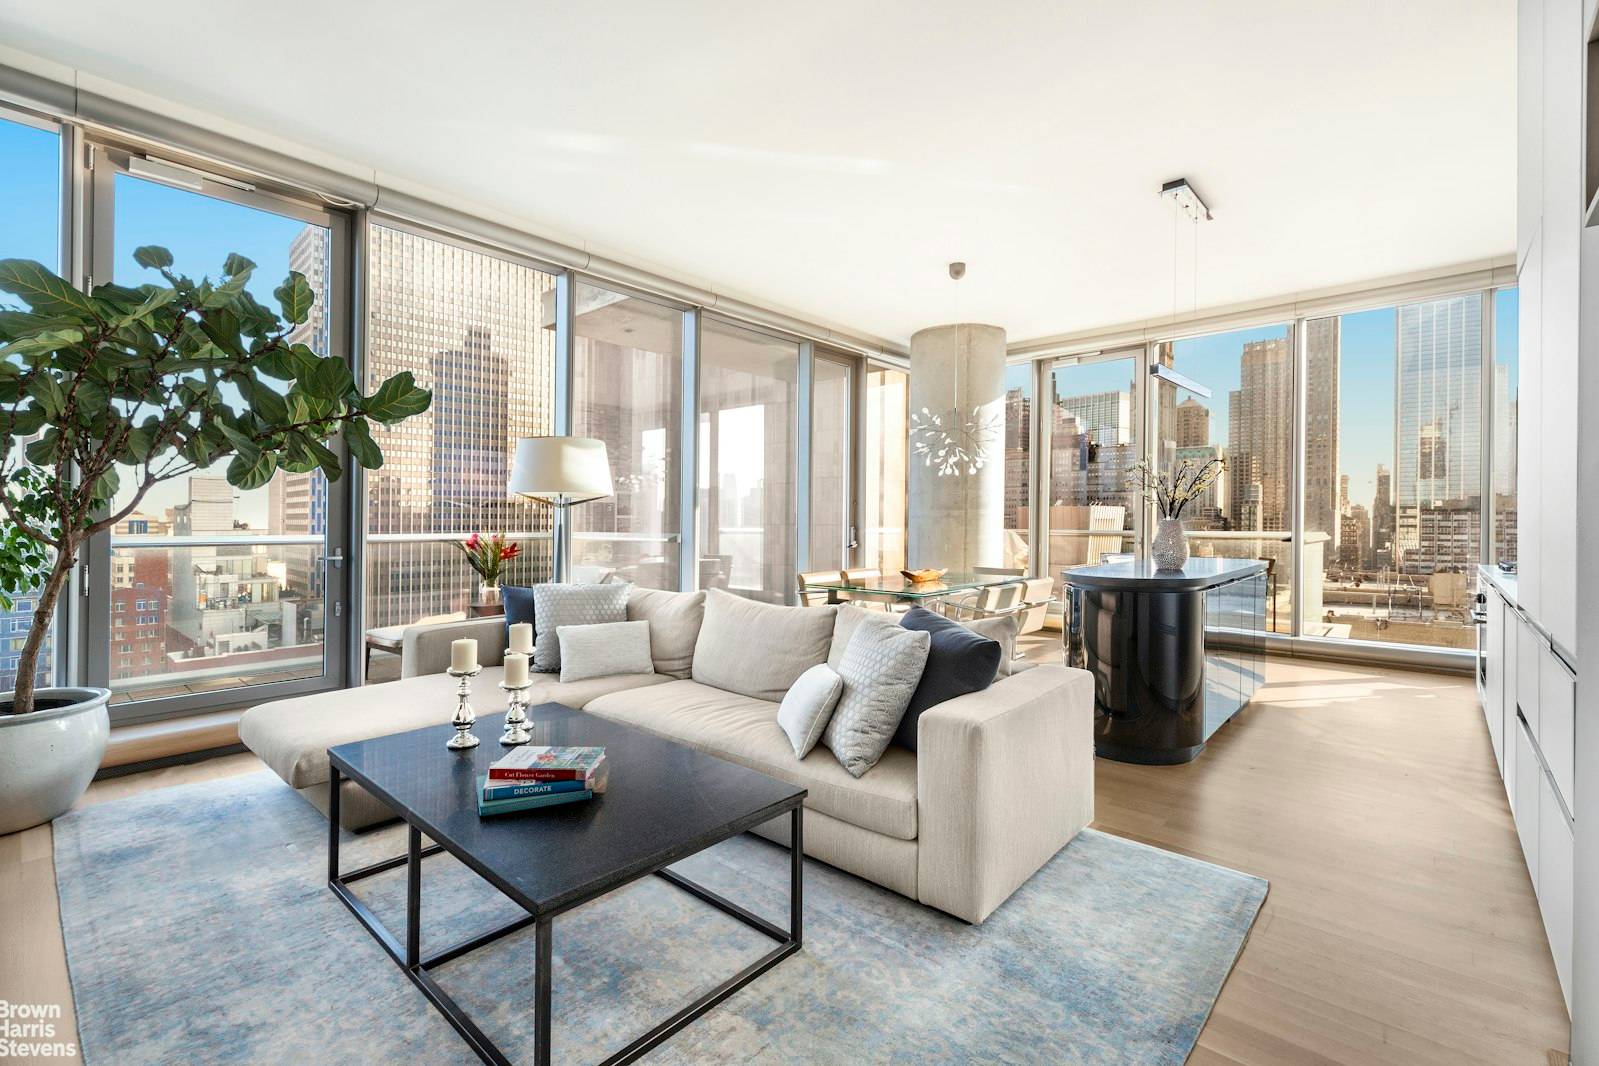 Breathtaking views of the downtown skyline and river greet you in this masterfully crafted condo by Herzog amp ; de Meuron.